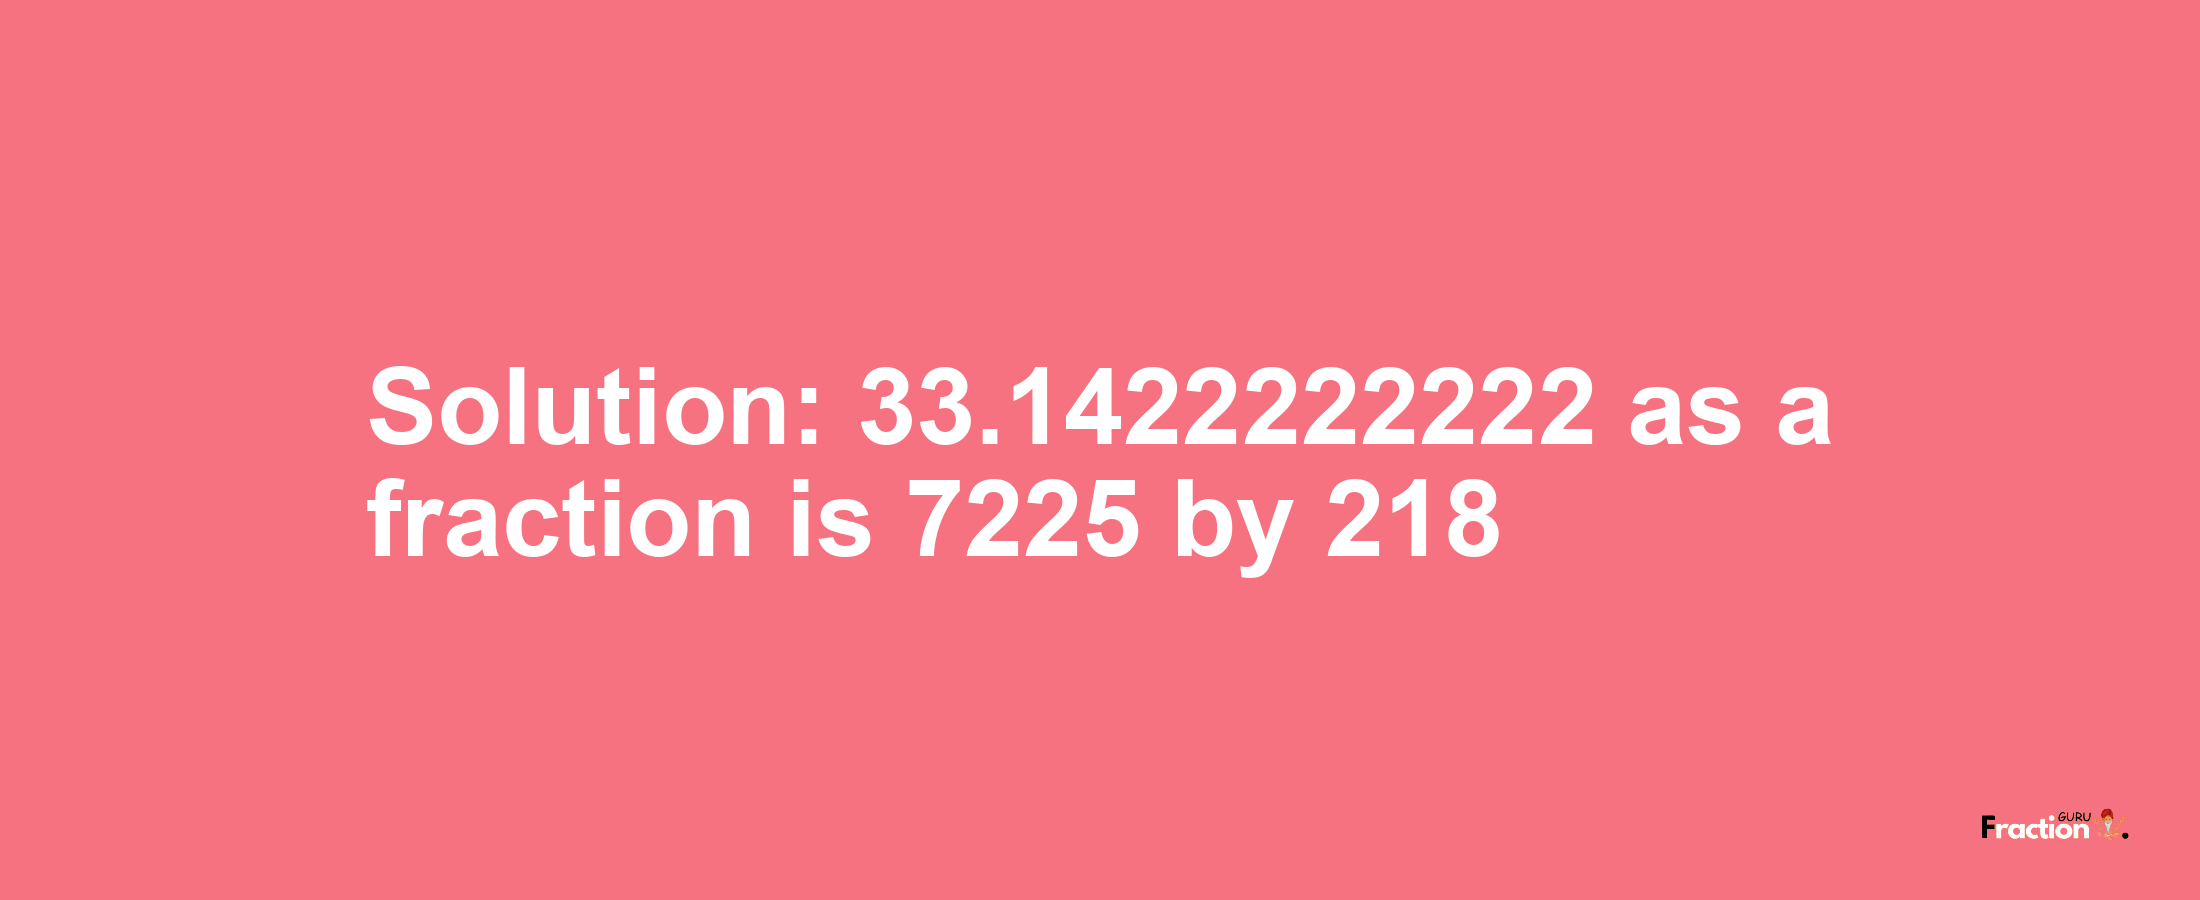 Solution:33.1422222222 as a fraction is 7225/218